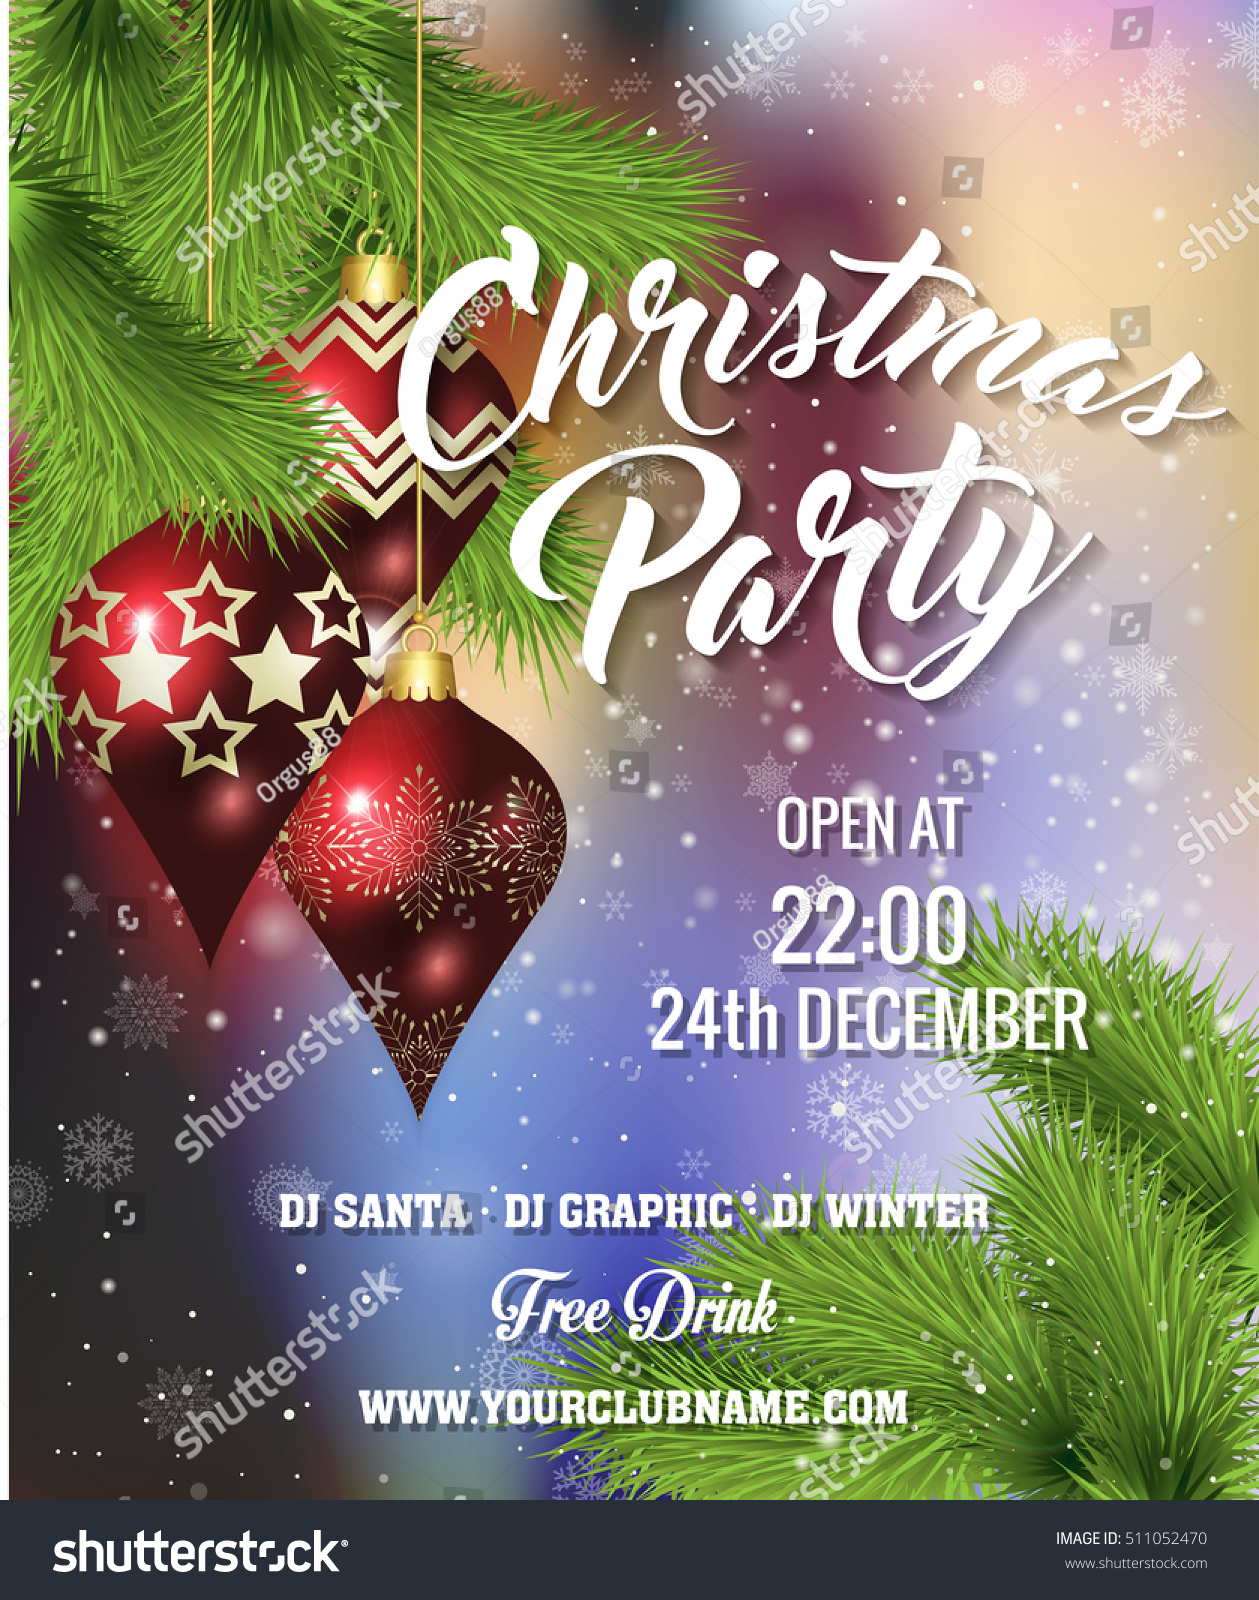 Christmas Party Poster Design Stock Vector Illustration 511052470 ...